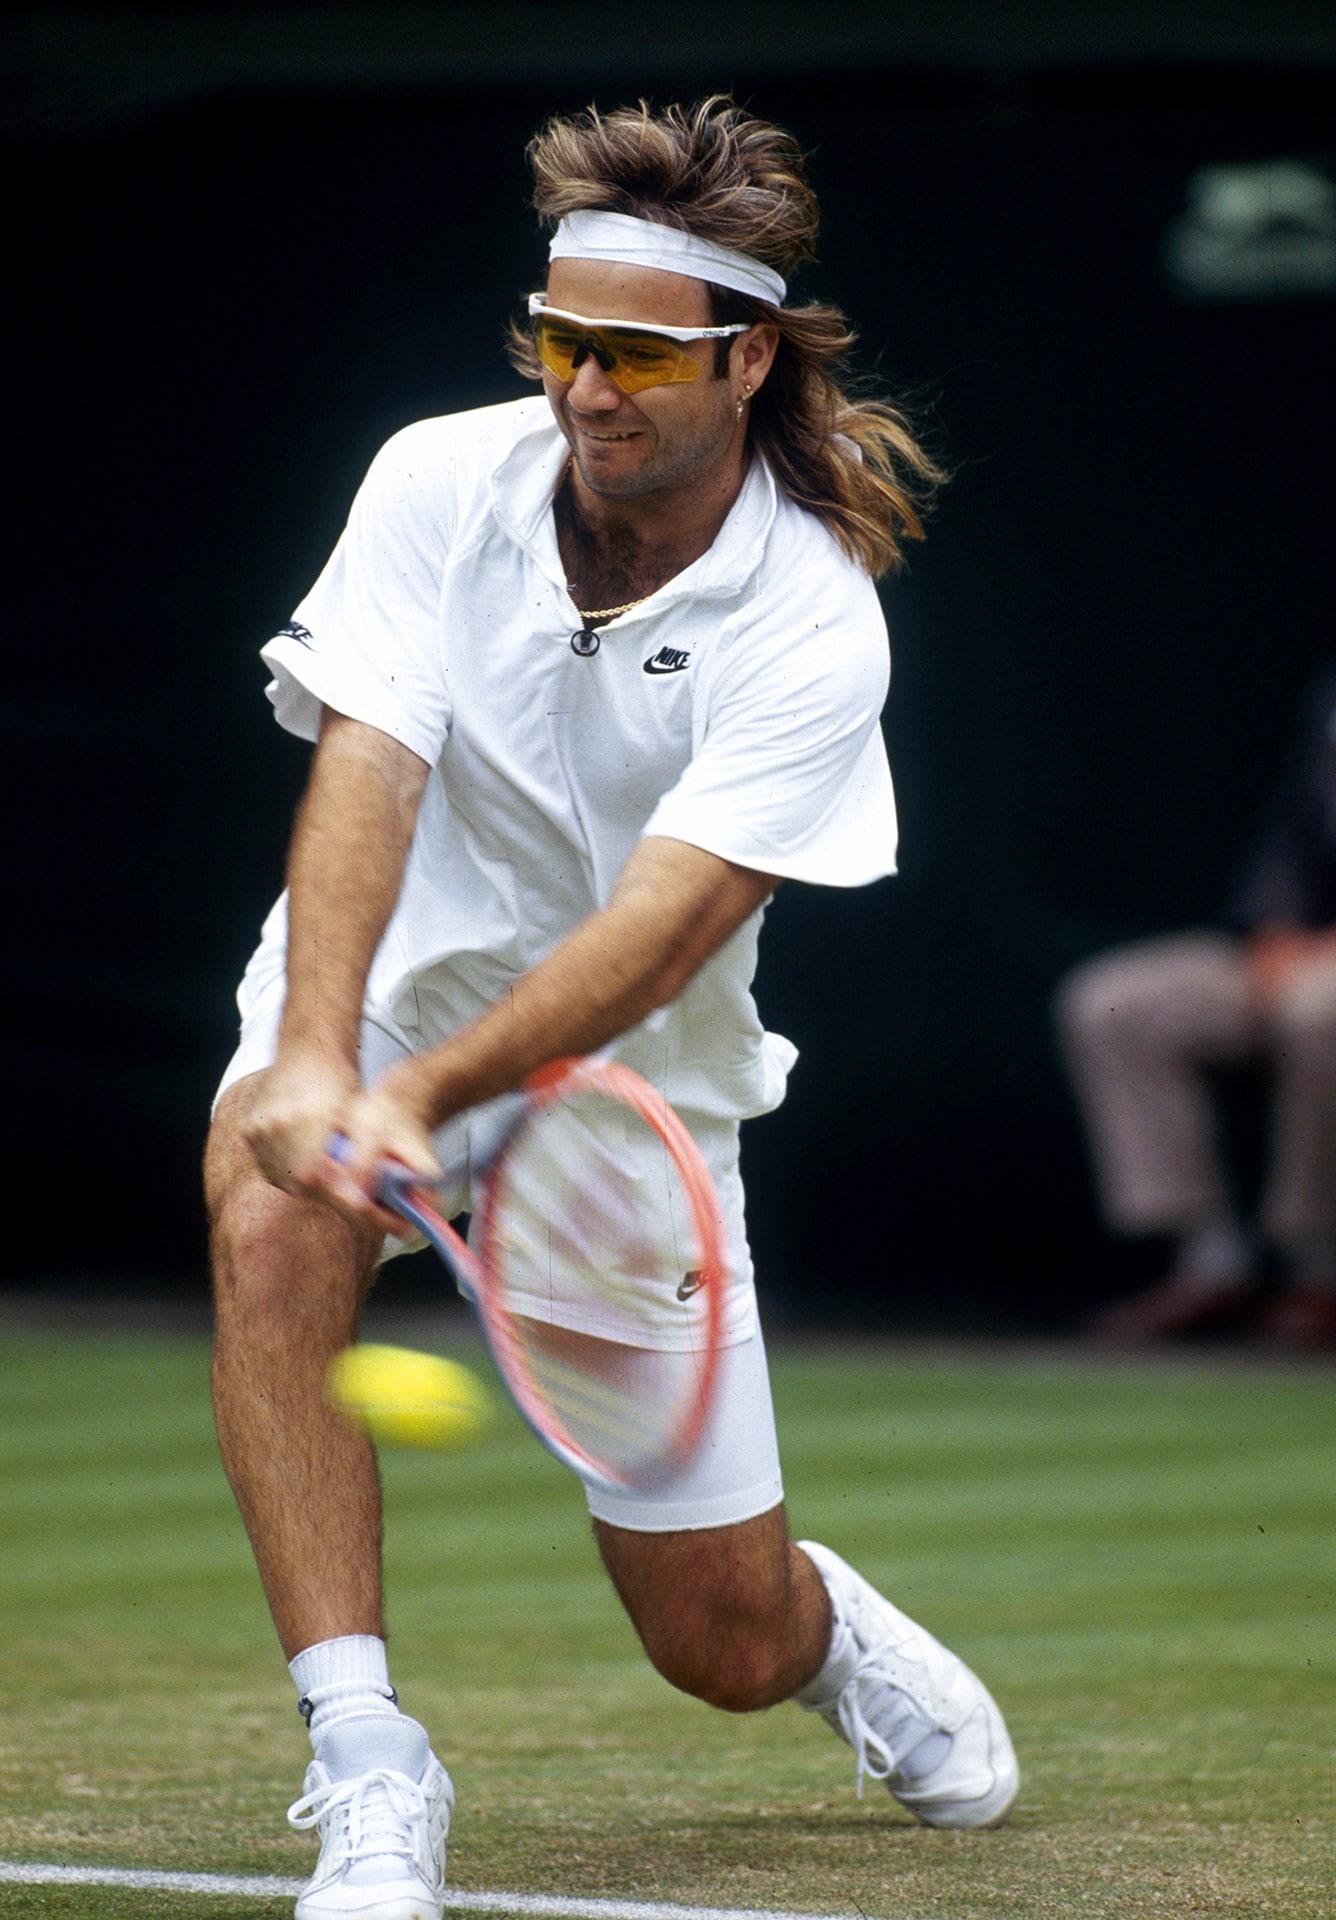 Wimbledon Dress Code Explained in 10 Simple Rules | Man of Many